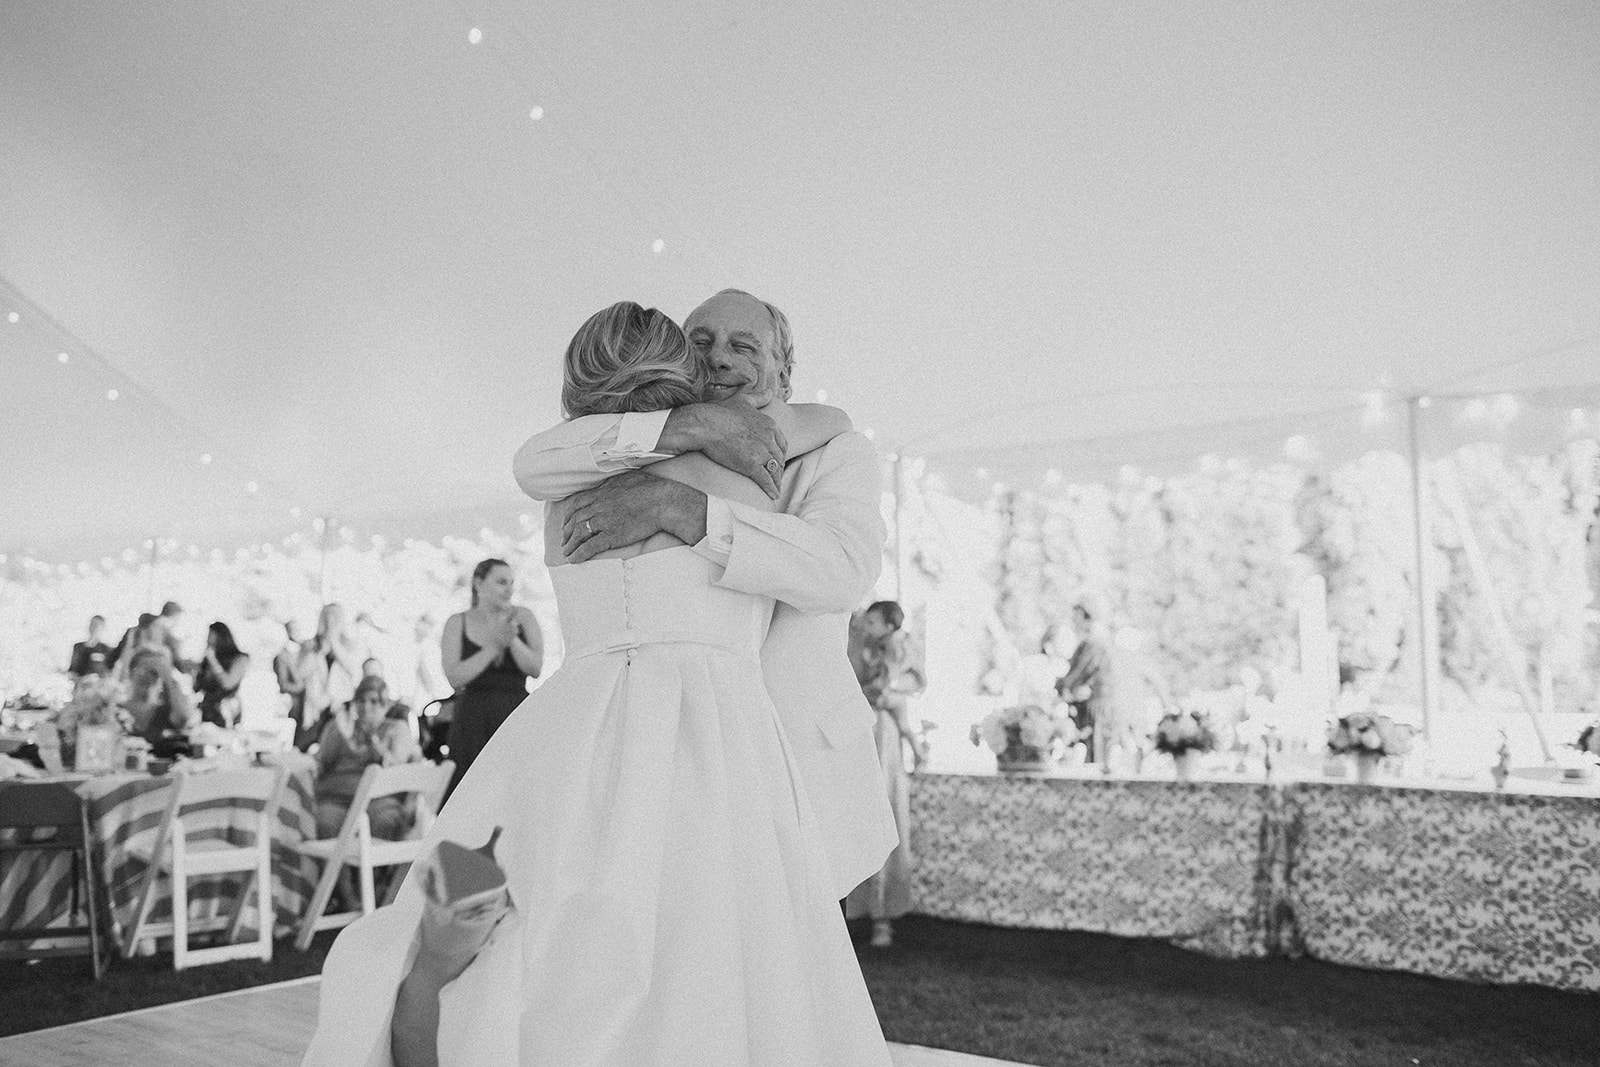 Joyful father and daughter dance under a tented wedding reception at the tea gardens of the Grand Hotel